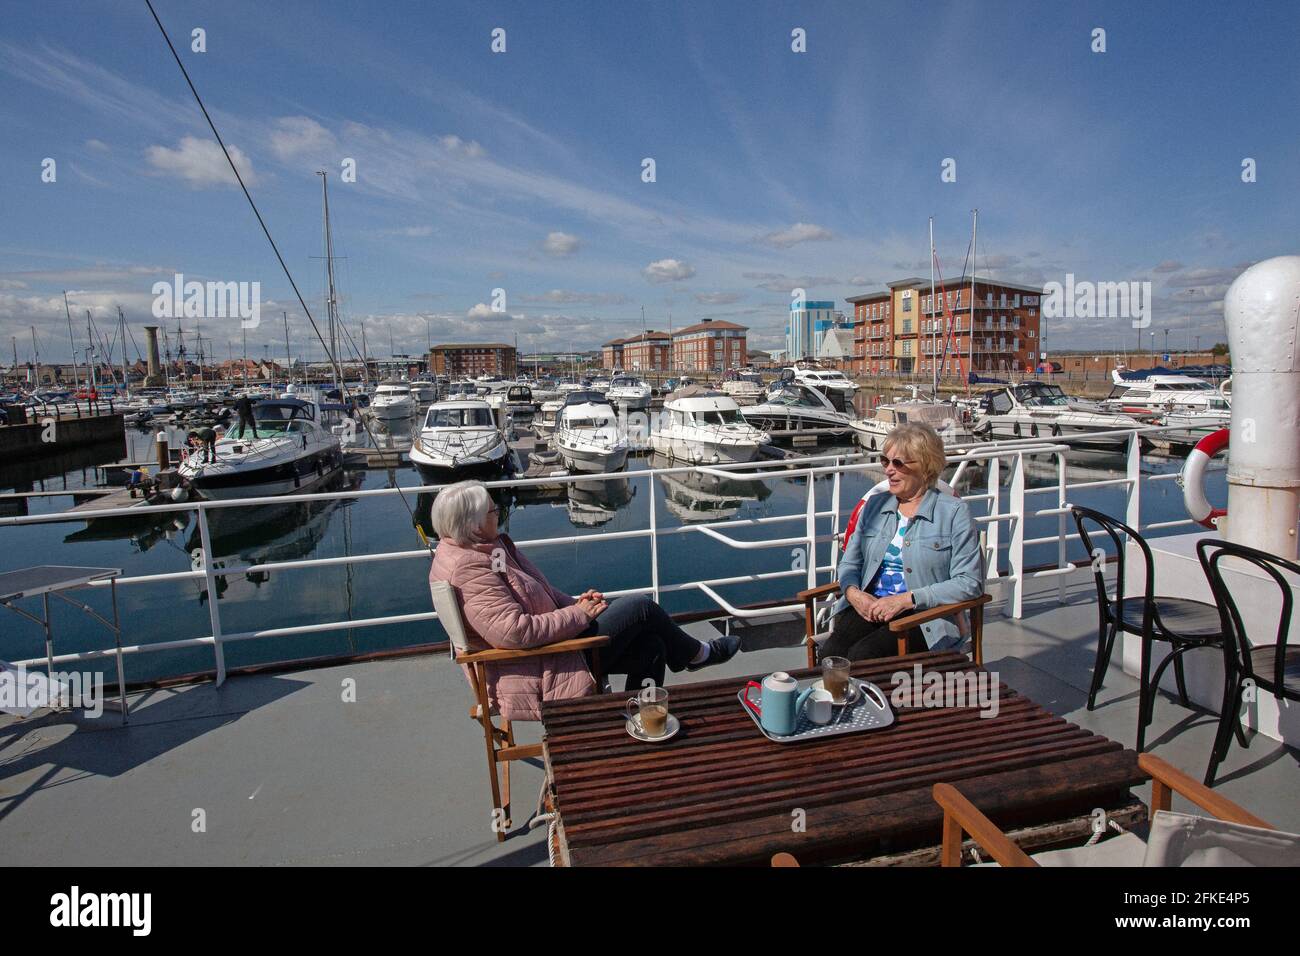 Two woman having tea at the newly restored Dunkirk little ship which has been transformed into coffee shop at Hartlepool marina,England, UK. Stock Photo